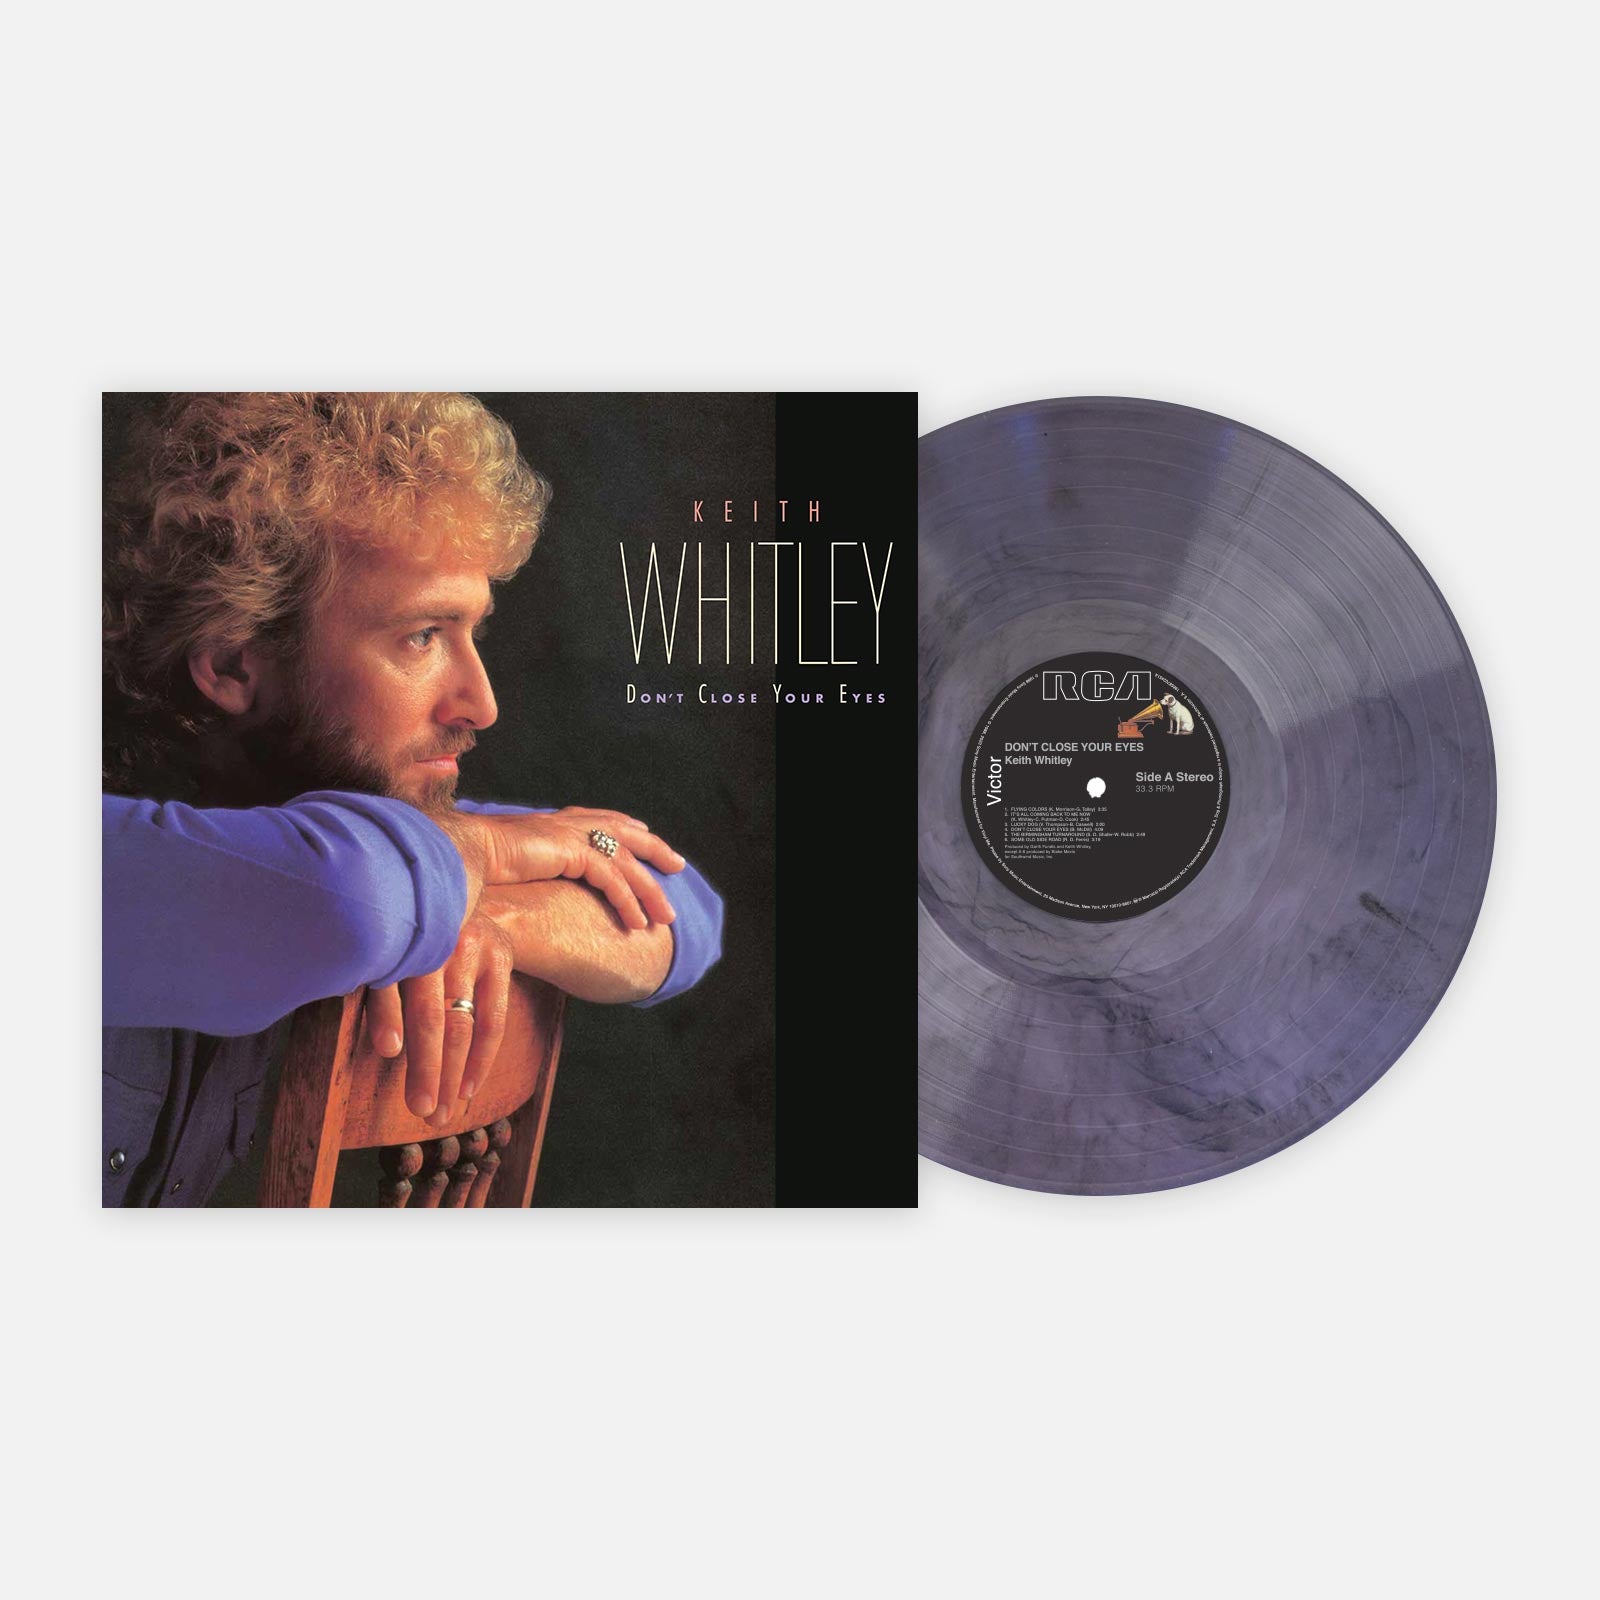 Keith Whitley 'Don't Close Your Eyes' - Vinyl Please